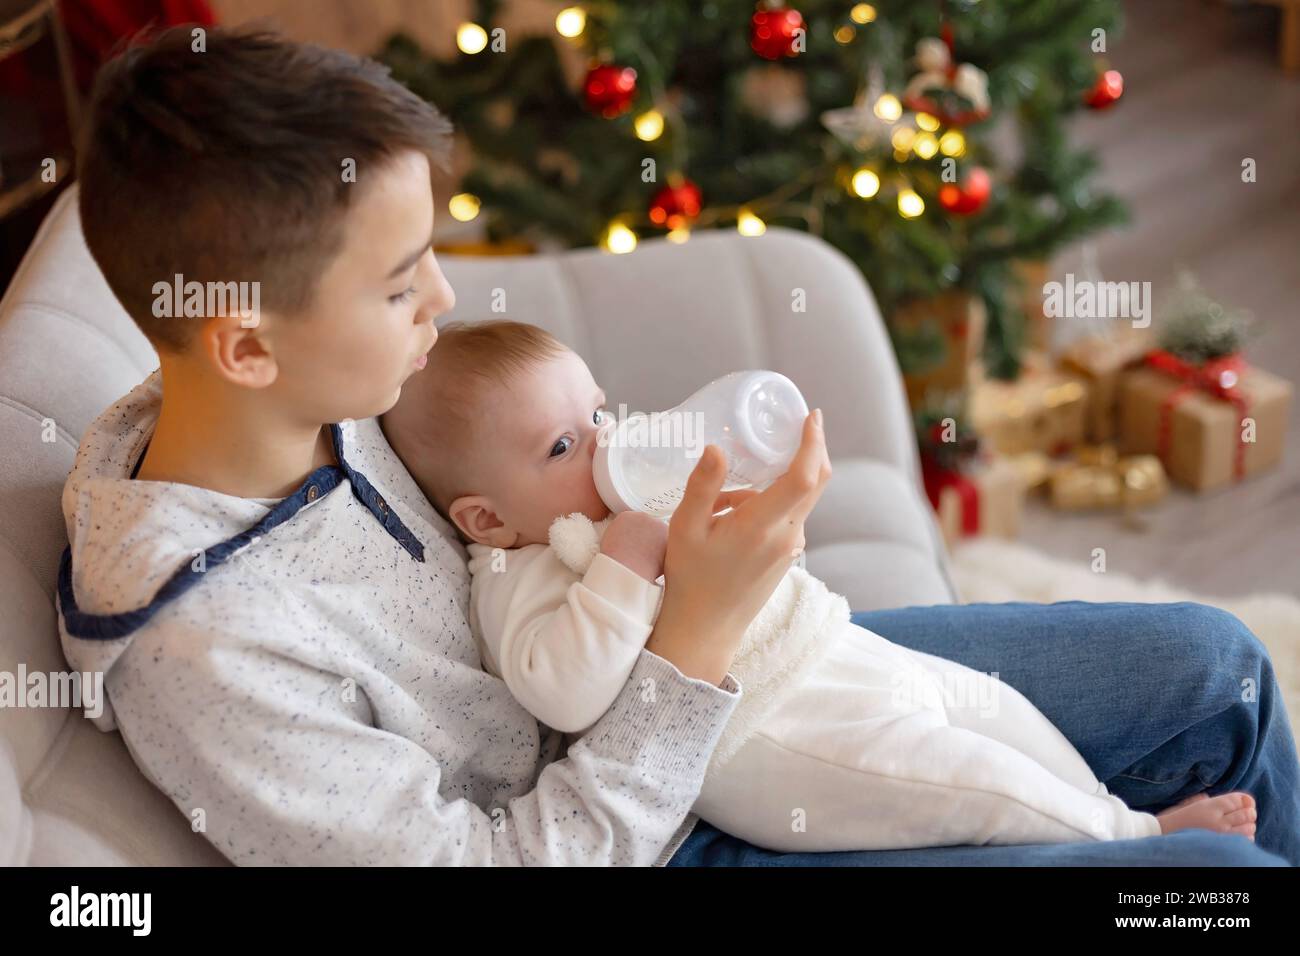 Happy family, newborn baby and older brothers, mom at home on Christmas Stock Photo